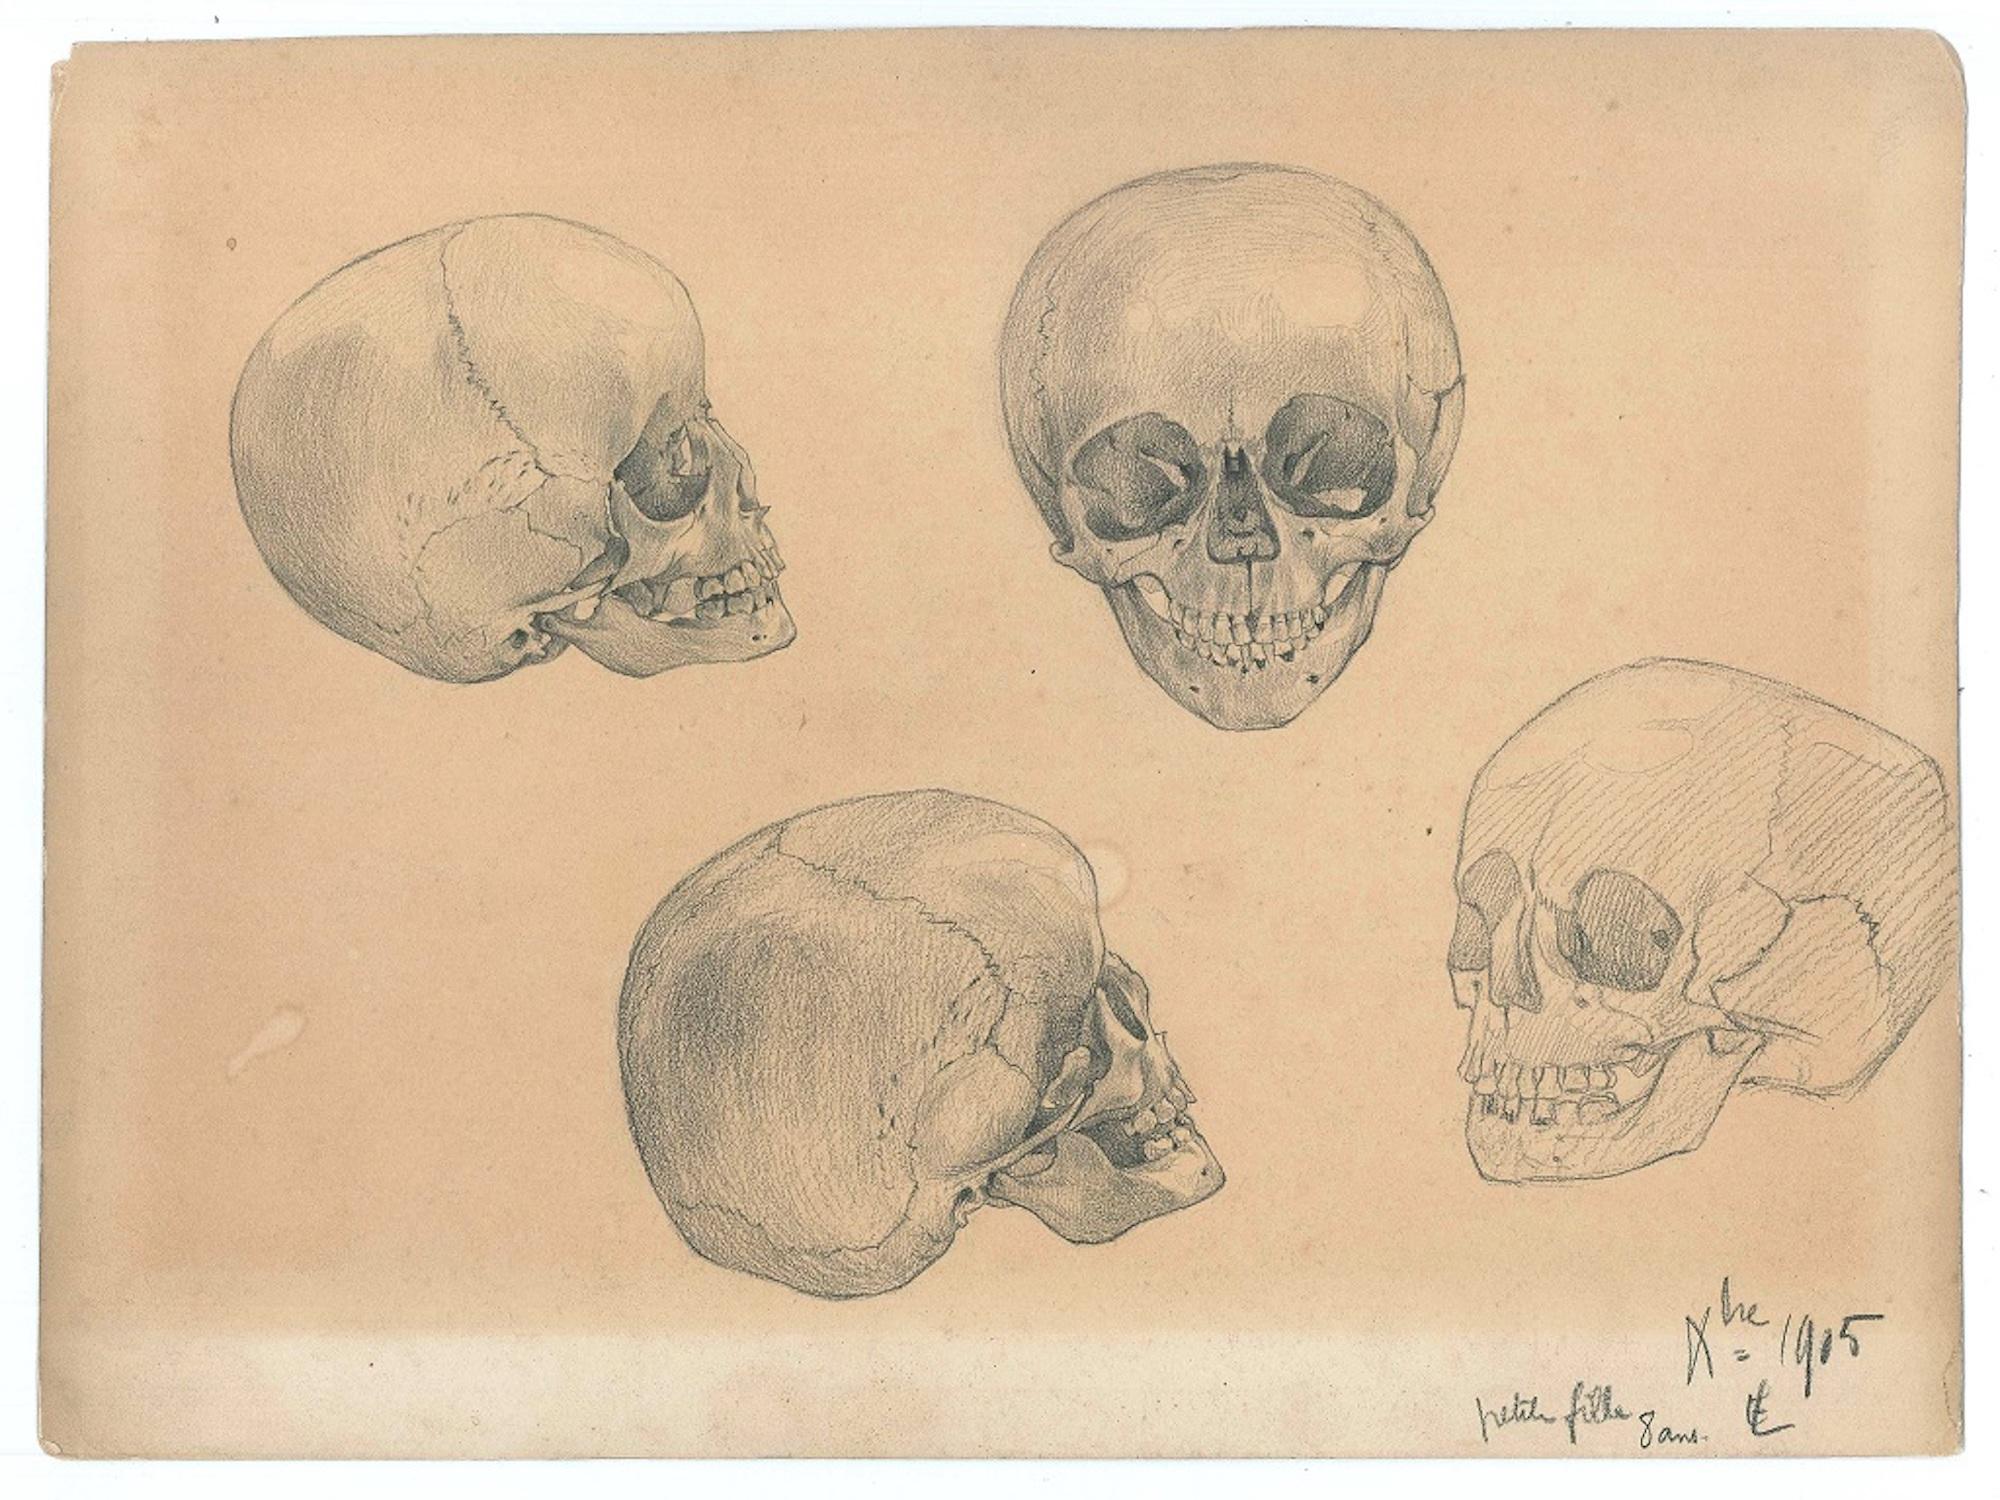 Petite Fille is a wonderful original pencil drawing on ivory-colored cardboard realized in 1905 by a French artist of XX century. 

This modern artwork represents an anatomical study of a skull of a child of 8 years in four different points of